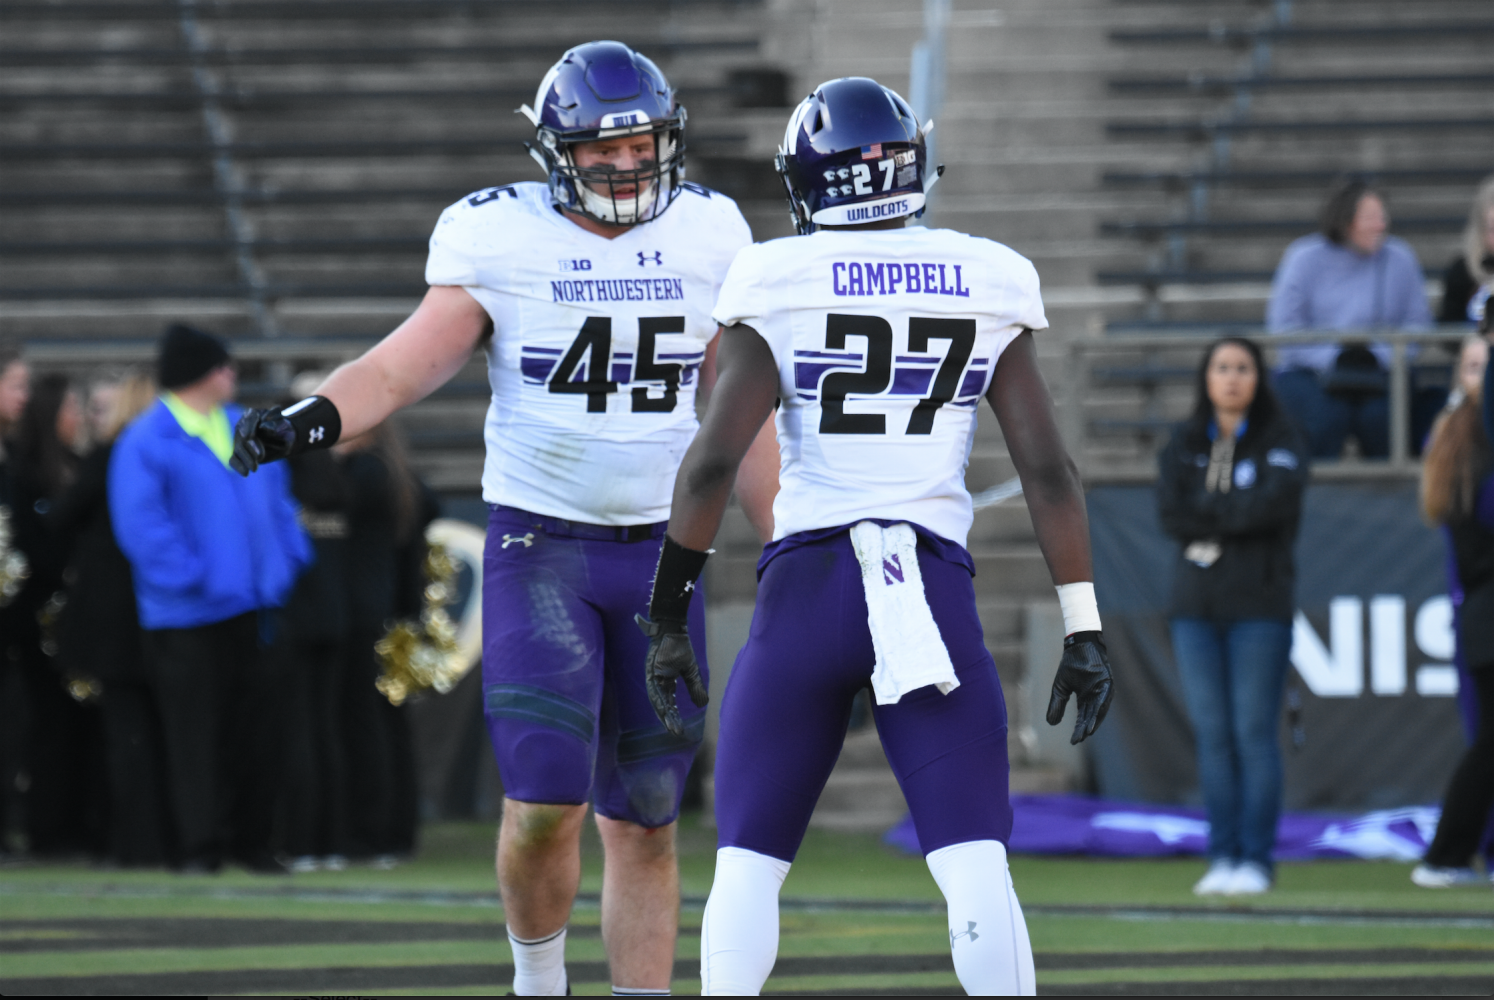 Nathan Fox (left) celebrates with a teammate in a game last year. Fox is a candidate to take over the middle linebacker job this season, though coach Pat Fitzgerald said there may not be a determined starter at that position.